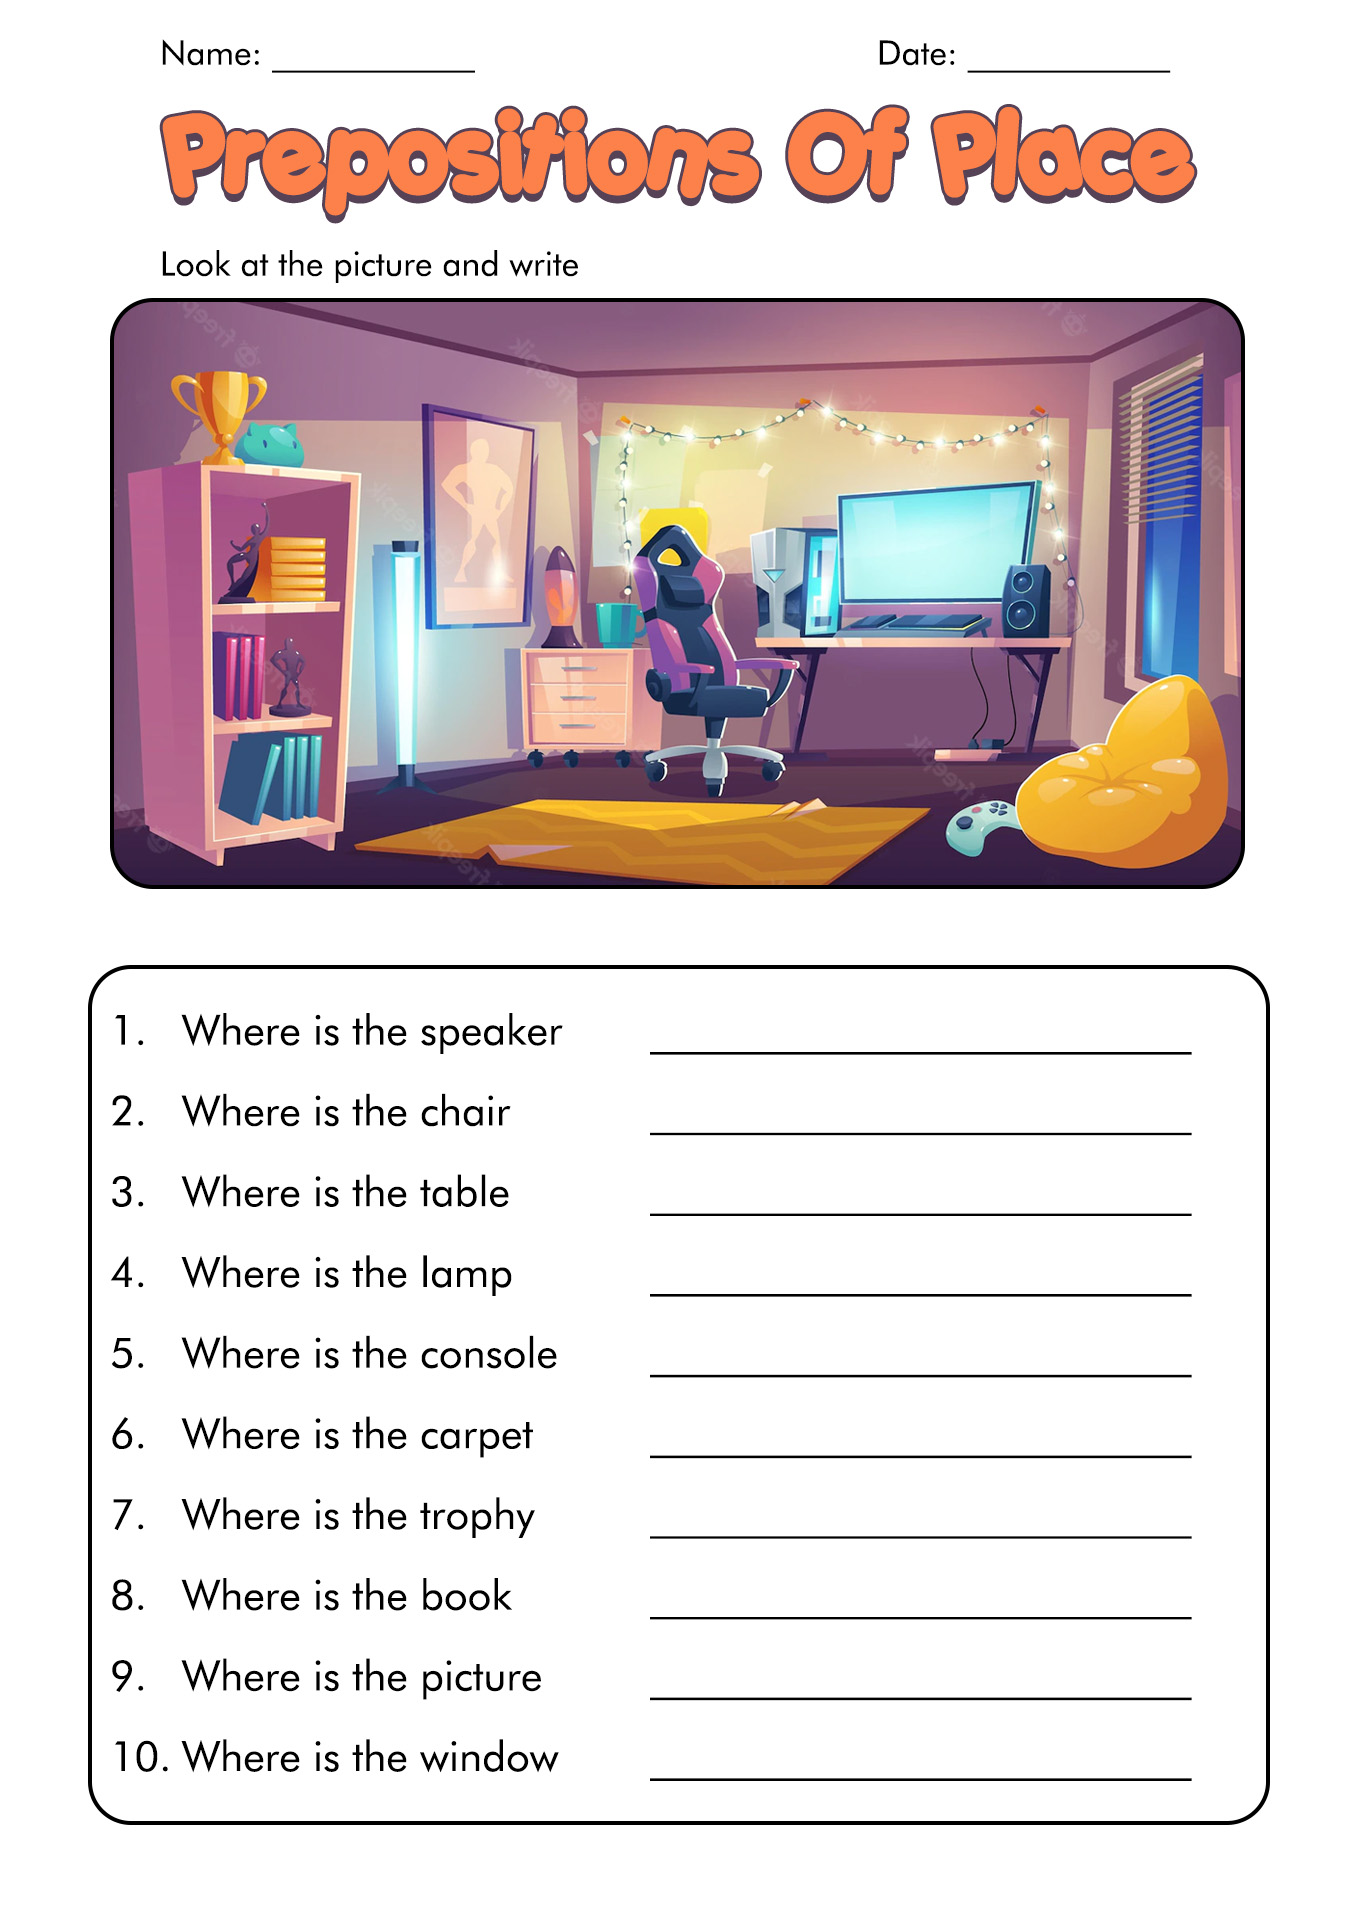 12-best-images-of-english-primary-1-worksheet-kindergarten-english-worksheets-free-english